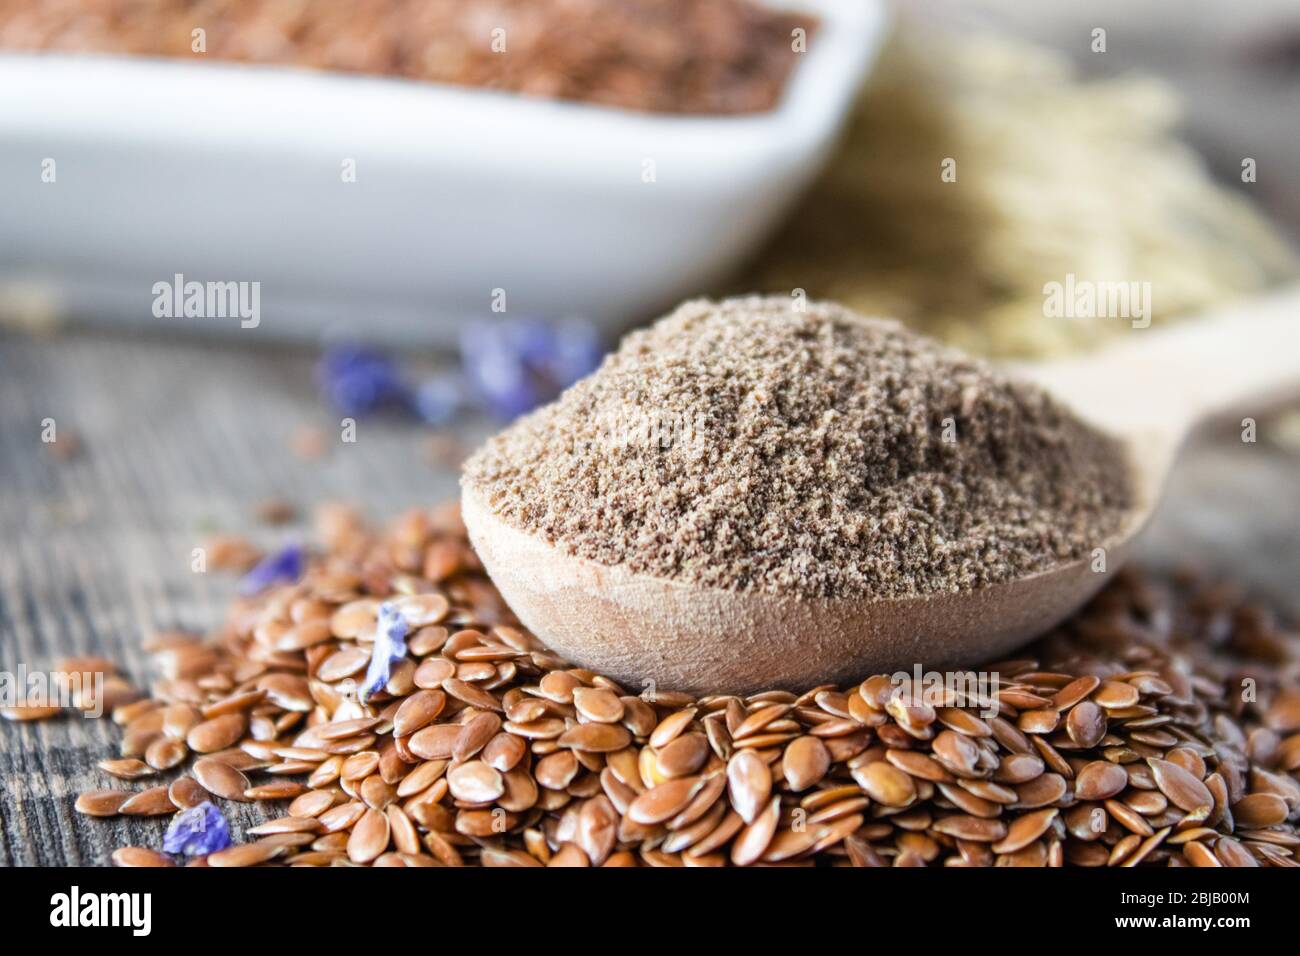 Crushed flax seed in a wooden spoon on a pile of flaxseed. Ground seed is used to prevent heart disease and being overweight. Stock Photo